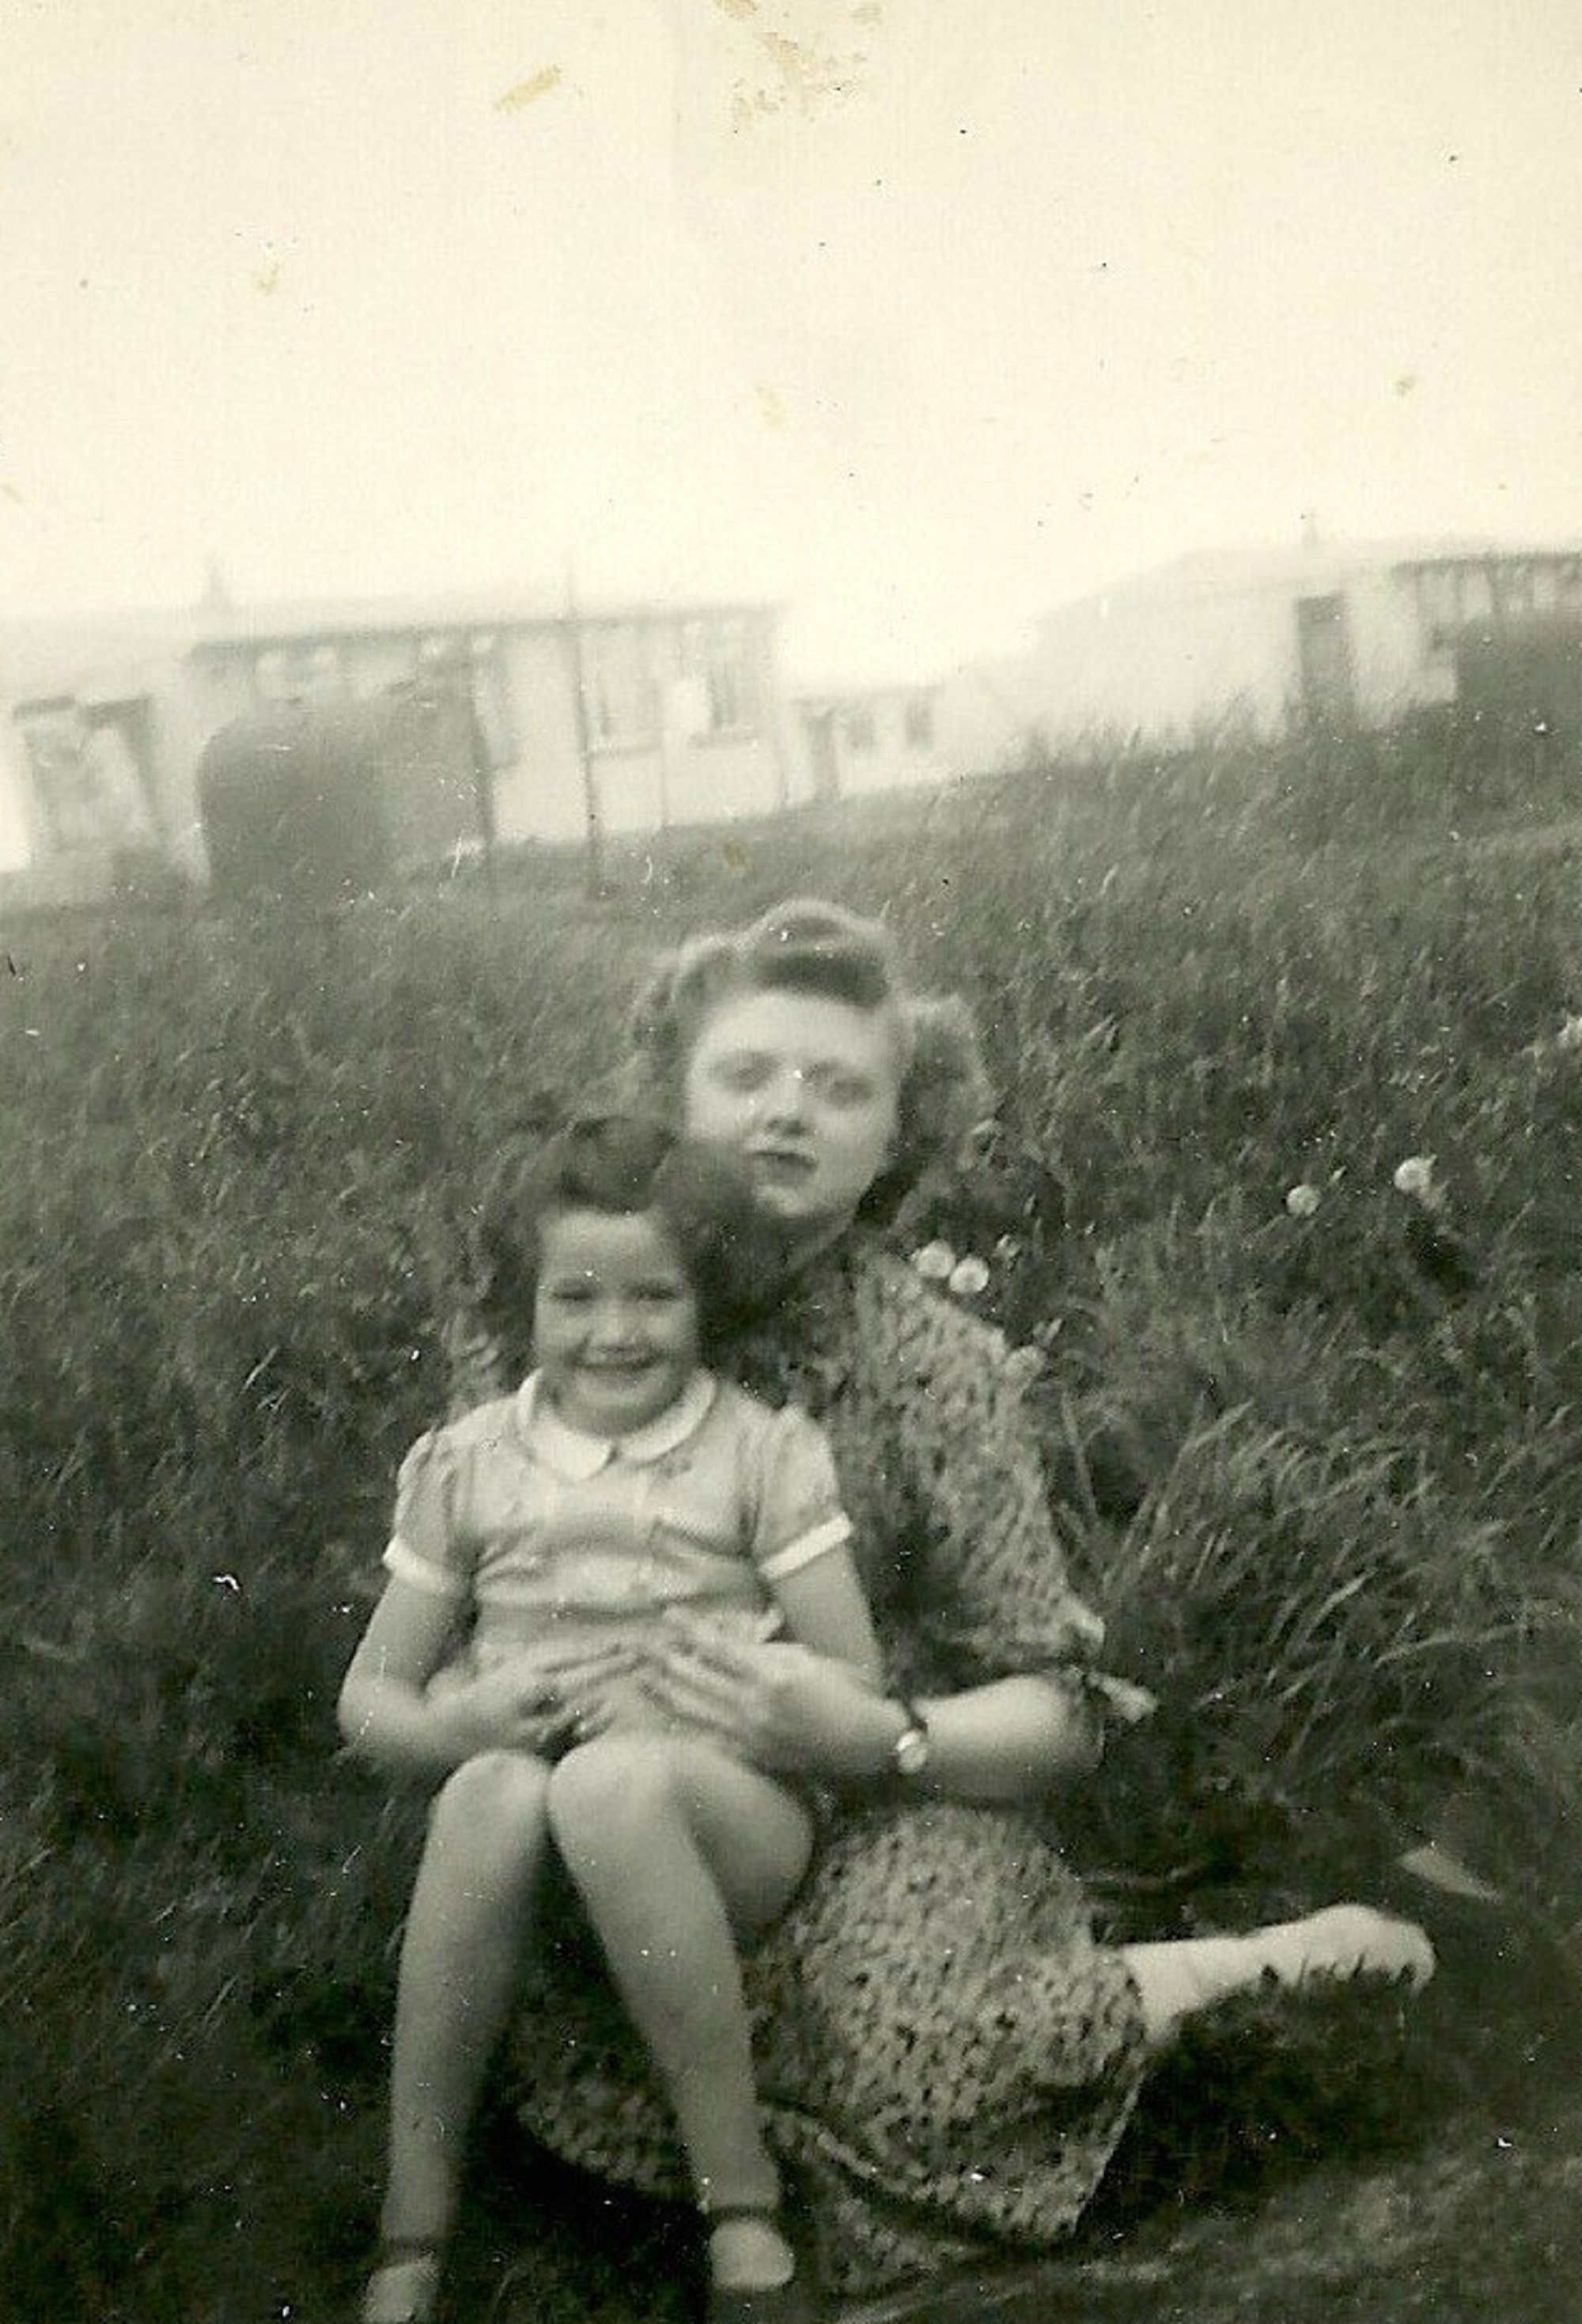 Ursula with Aunt Cecily in Peter Ford's family prefab garden, Shrewsbury